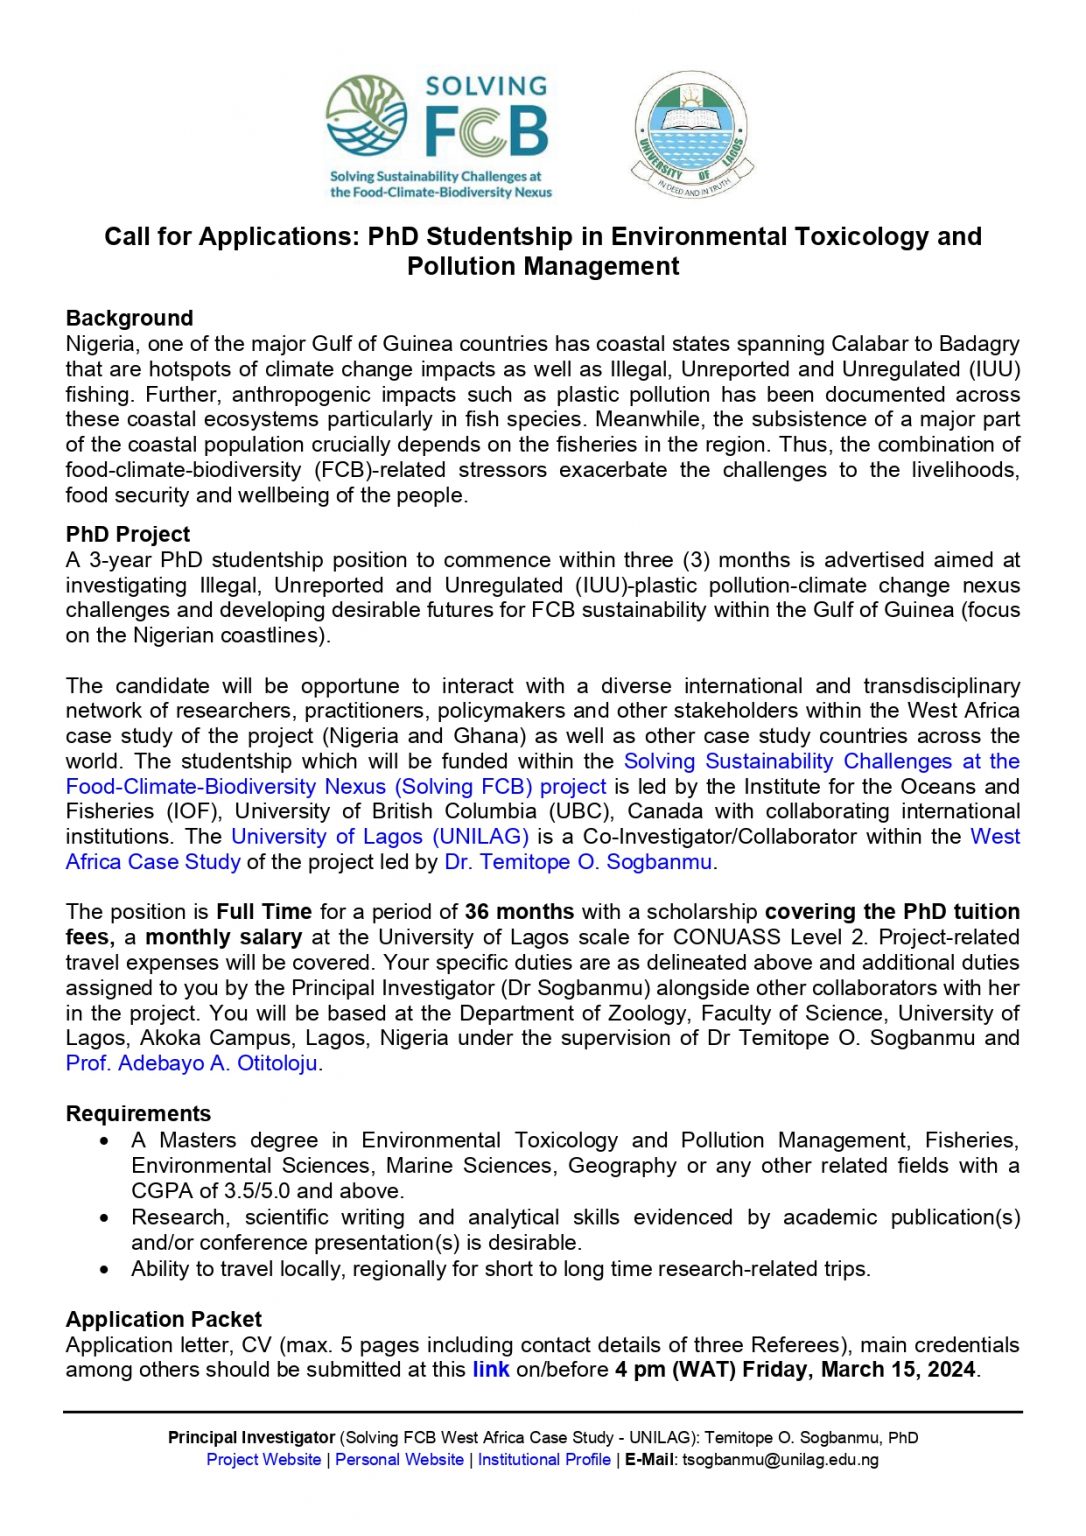 Call for PhD Studentship in ETPM Solving FCB Project 1 page 0001 1086x1536 1